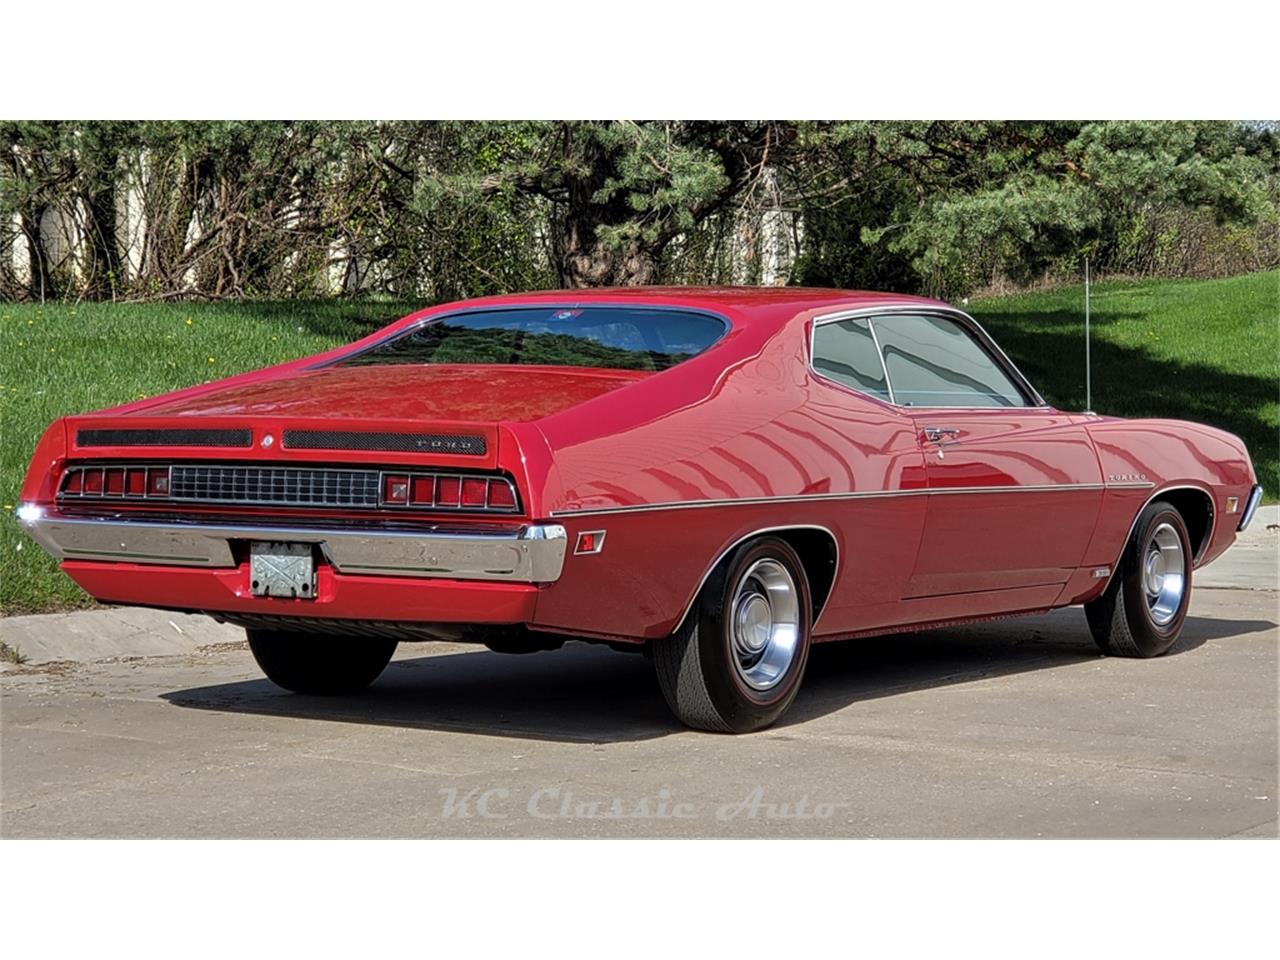 Seen this 1970 ford torino gt. On flickr.my only question is what color  is it? Deep maroon or regular maroon? : r/classiccars